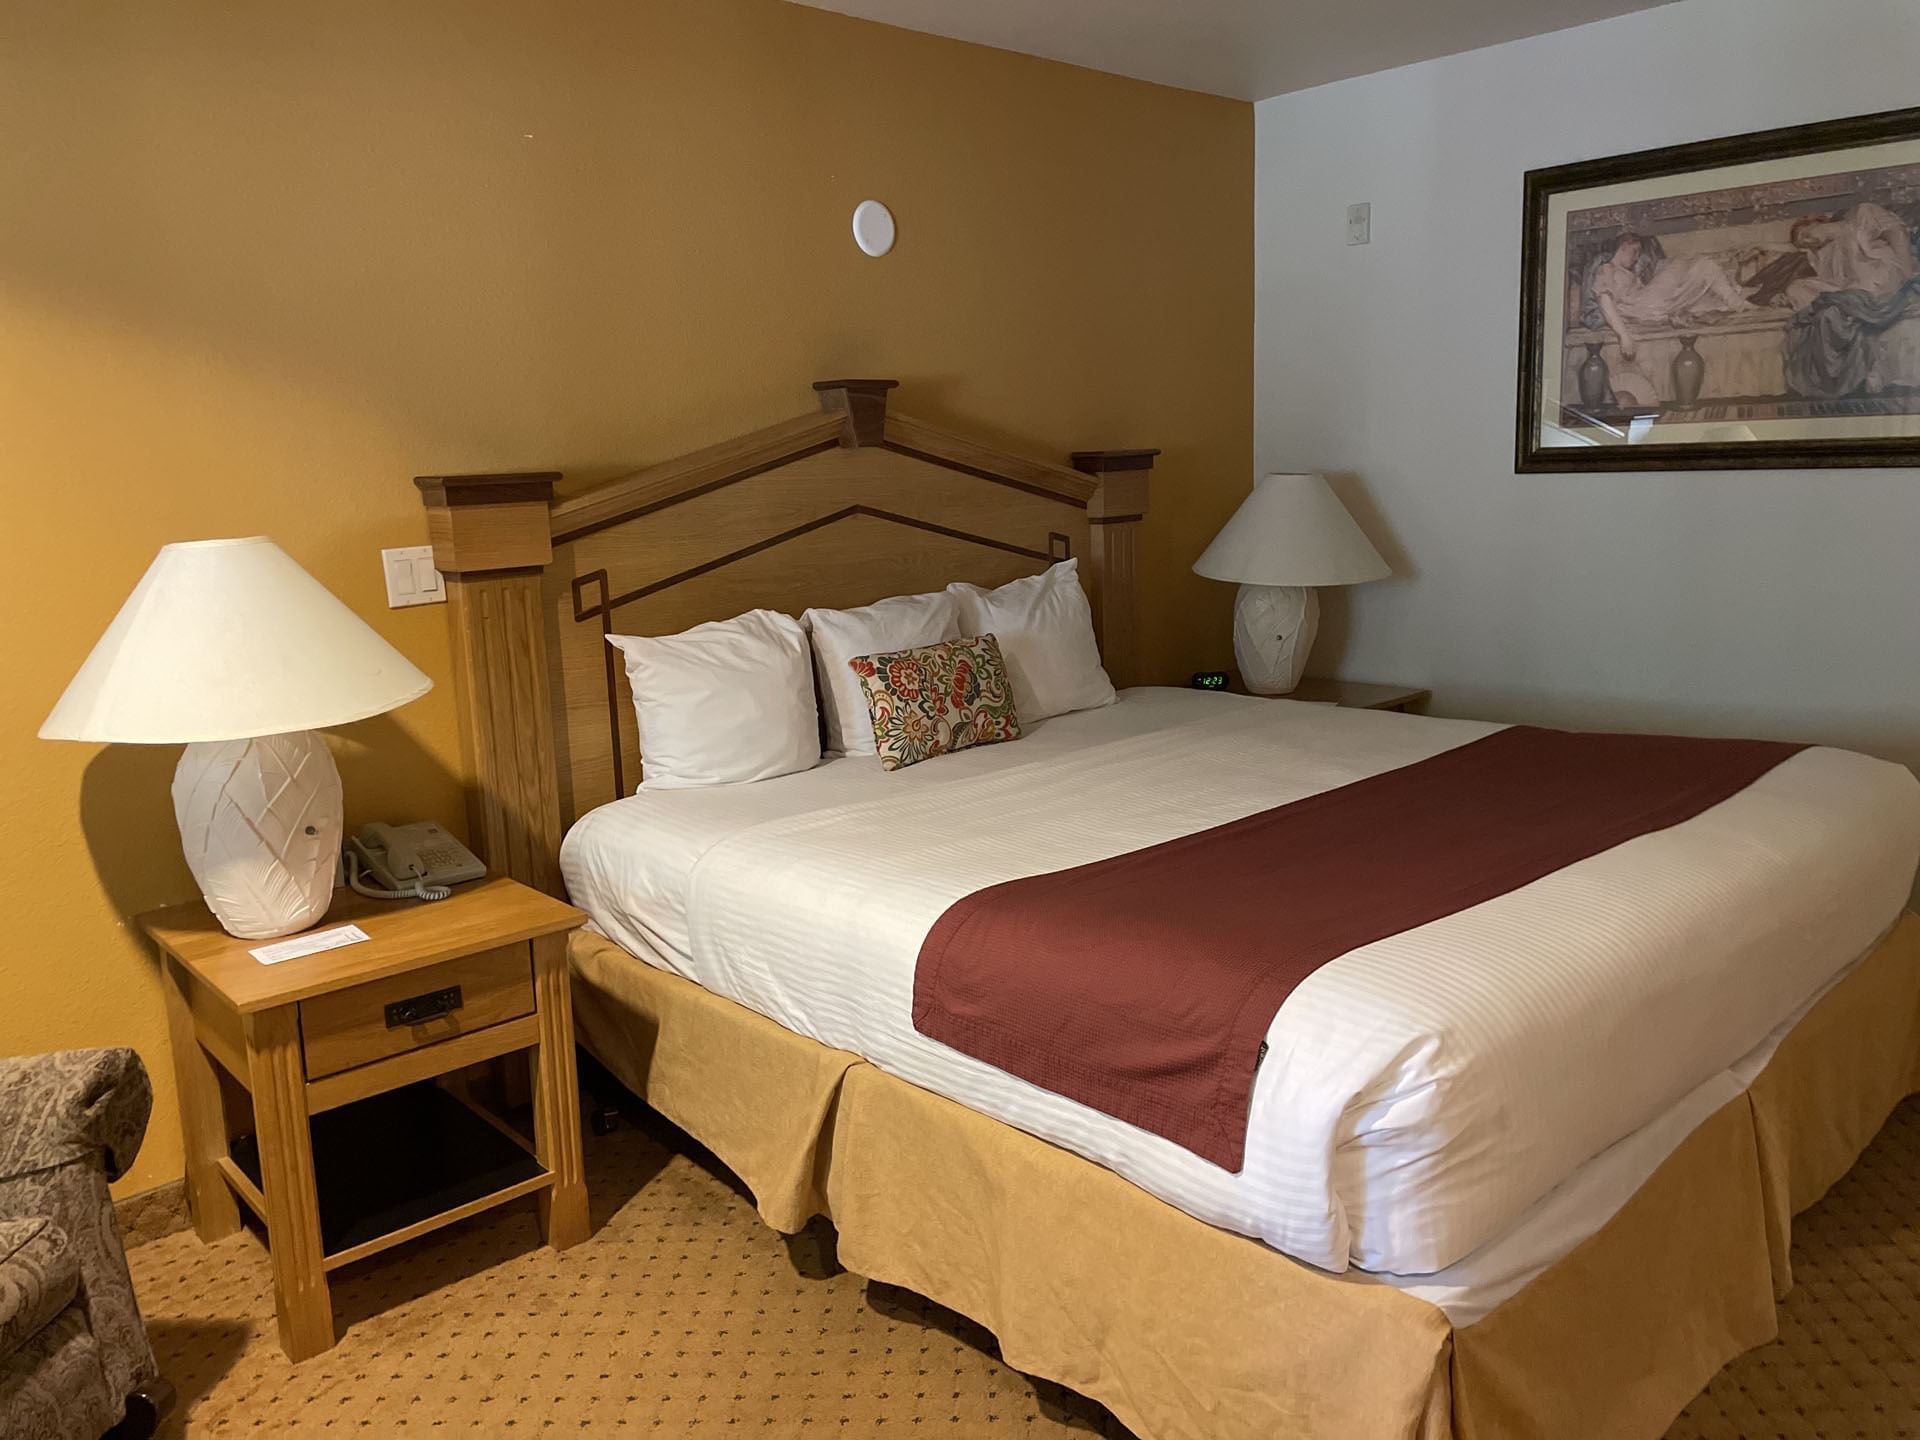 Deluxe King Room with Hot Tub at Carson Hot Springs Resort